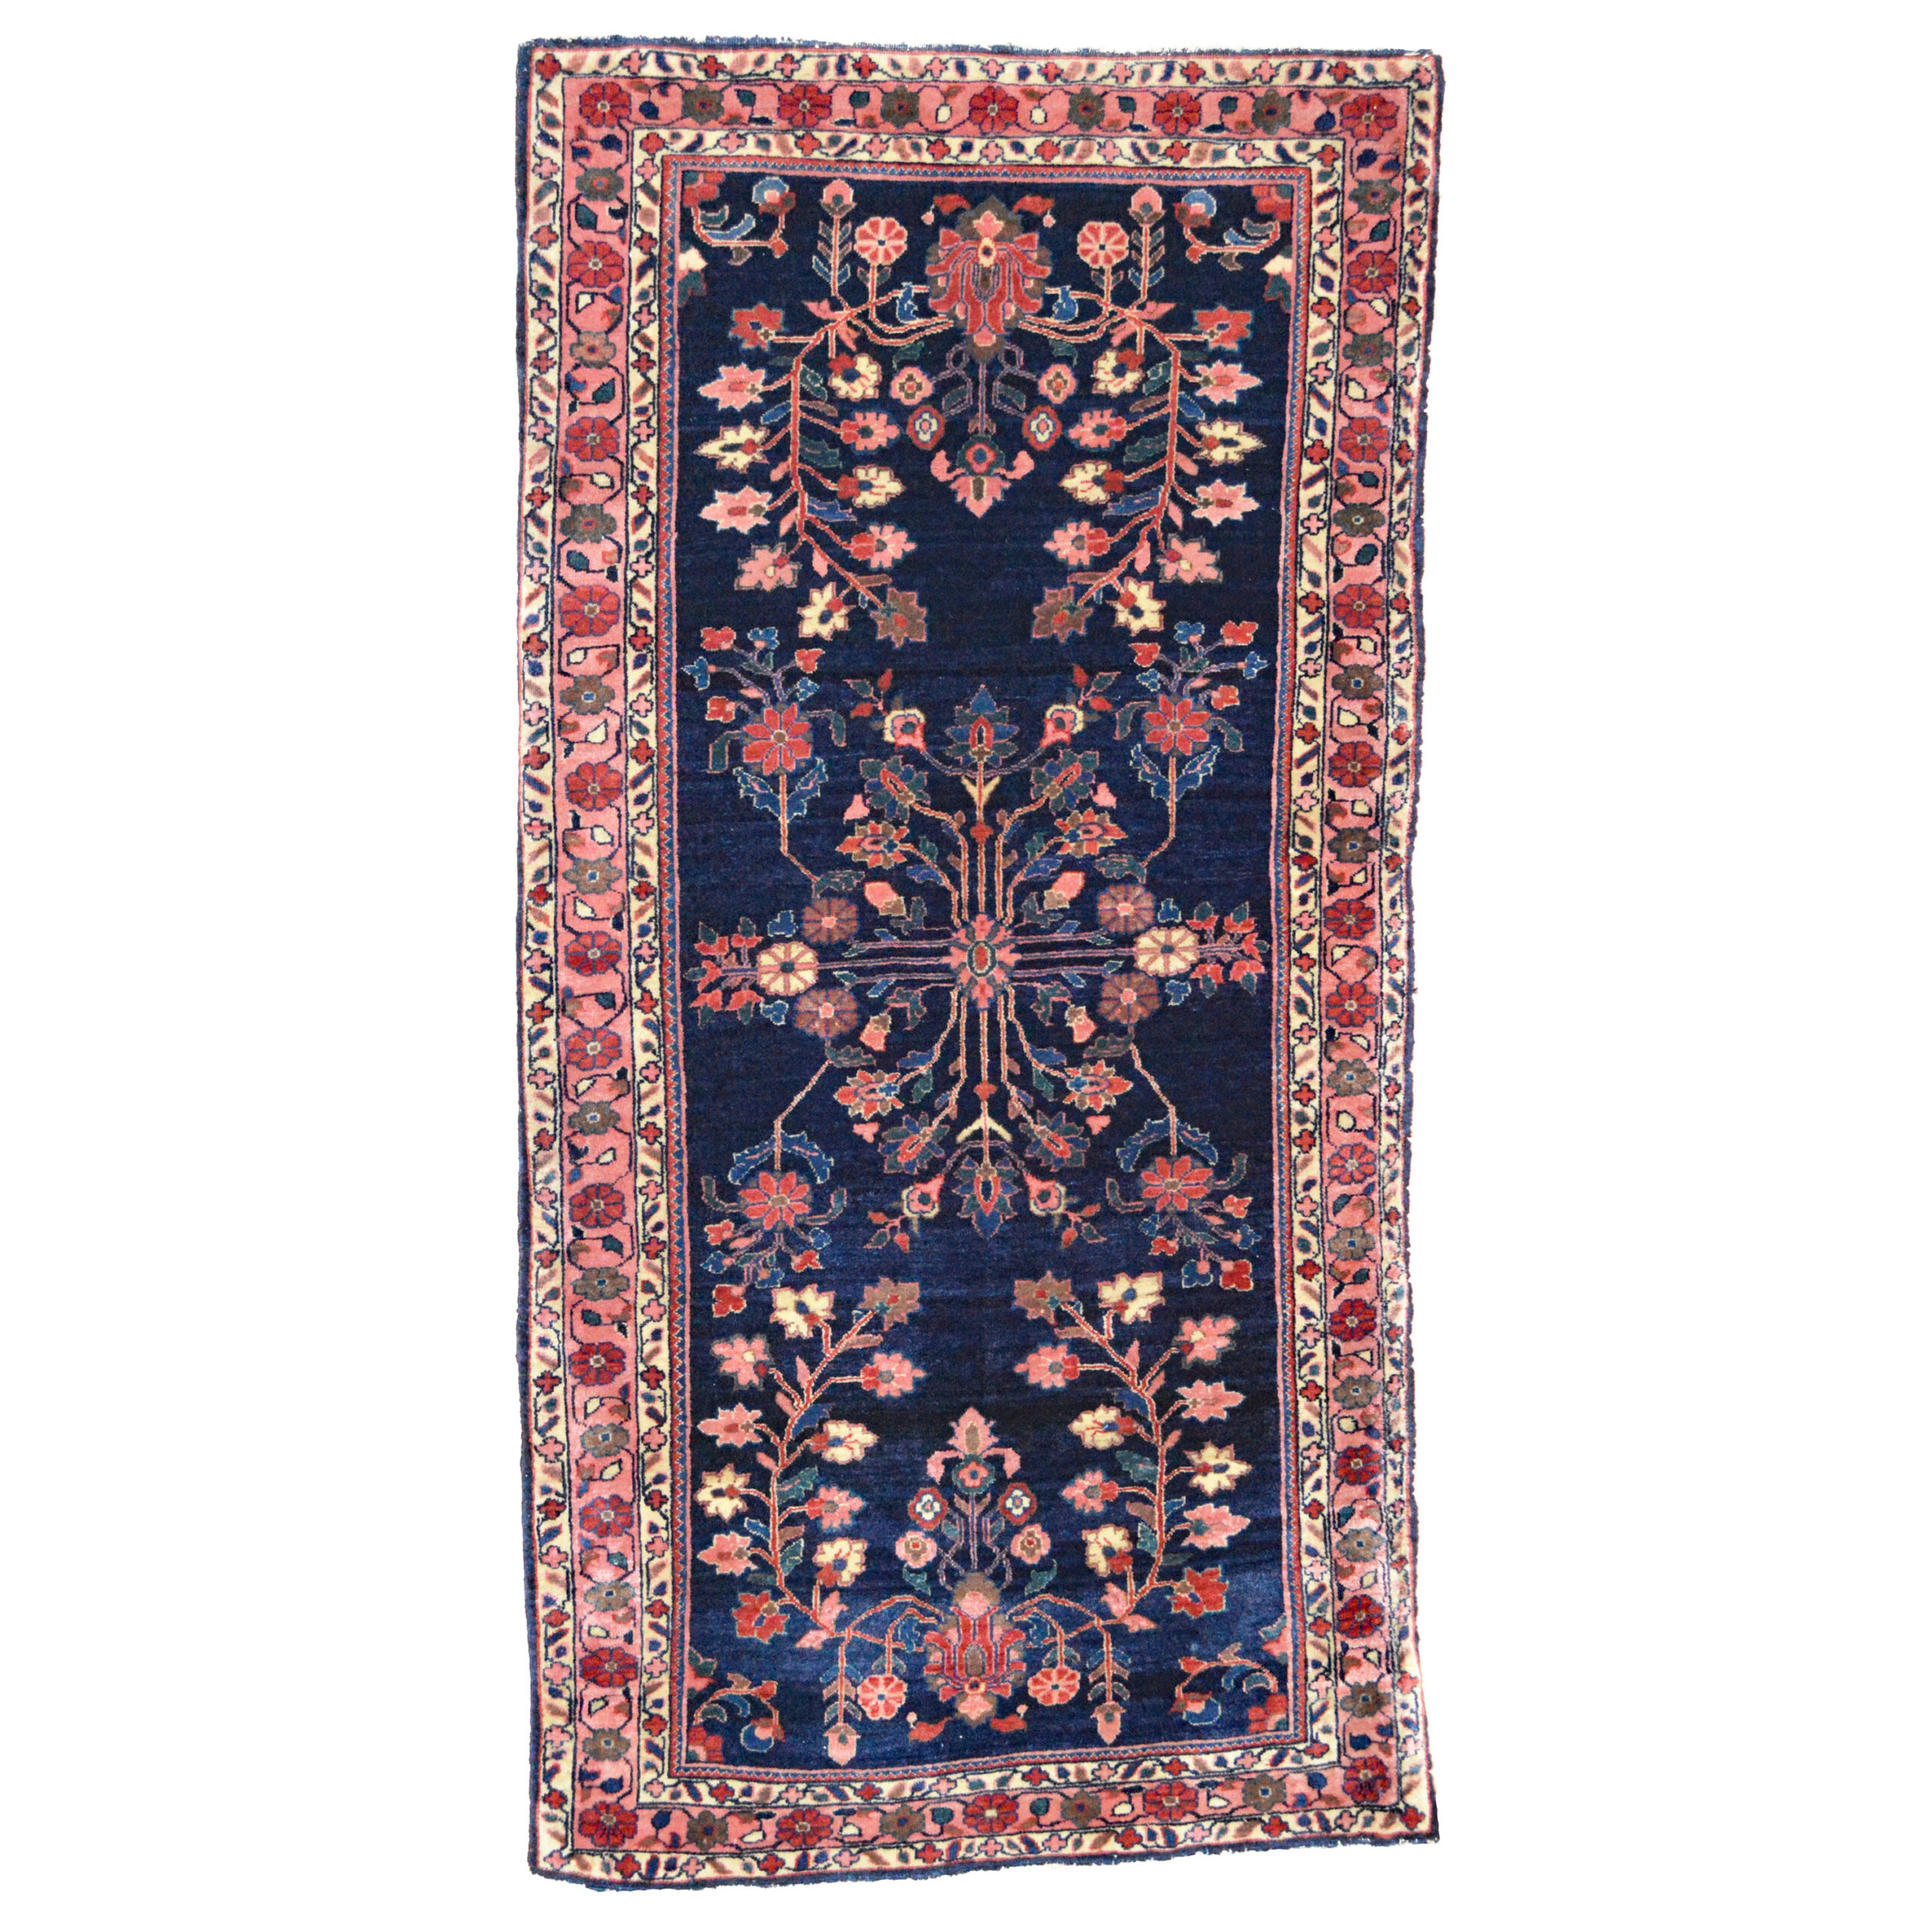 A finely woven antique Persian Mahajaran Sarouk rug. The navy field is decorated with stylized flowers and framed by a coral color border, circa 1915. Douglas Stock Gallery is a nationally regarded dealer in antique Oriental rugs based in the Boston area. Our shop in historic South Natick,MA is located 15 miles west of Boston and 5 minutes from Wellesley center. Douglas Stock Gallery is open by appointment Monday to Saturday. Antique Sarouk rugs Boston, NYC, Washington ,DC by appointment